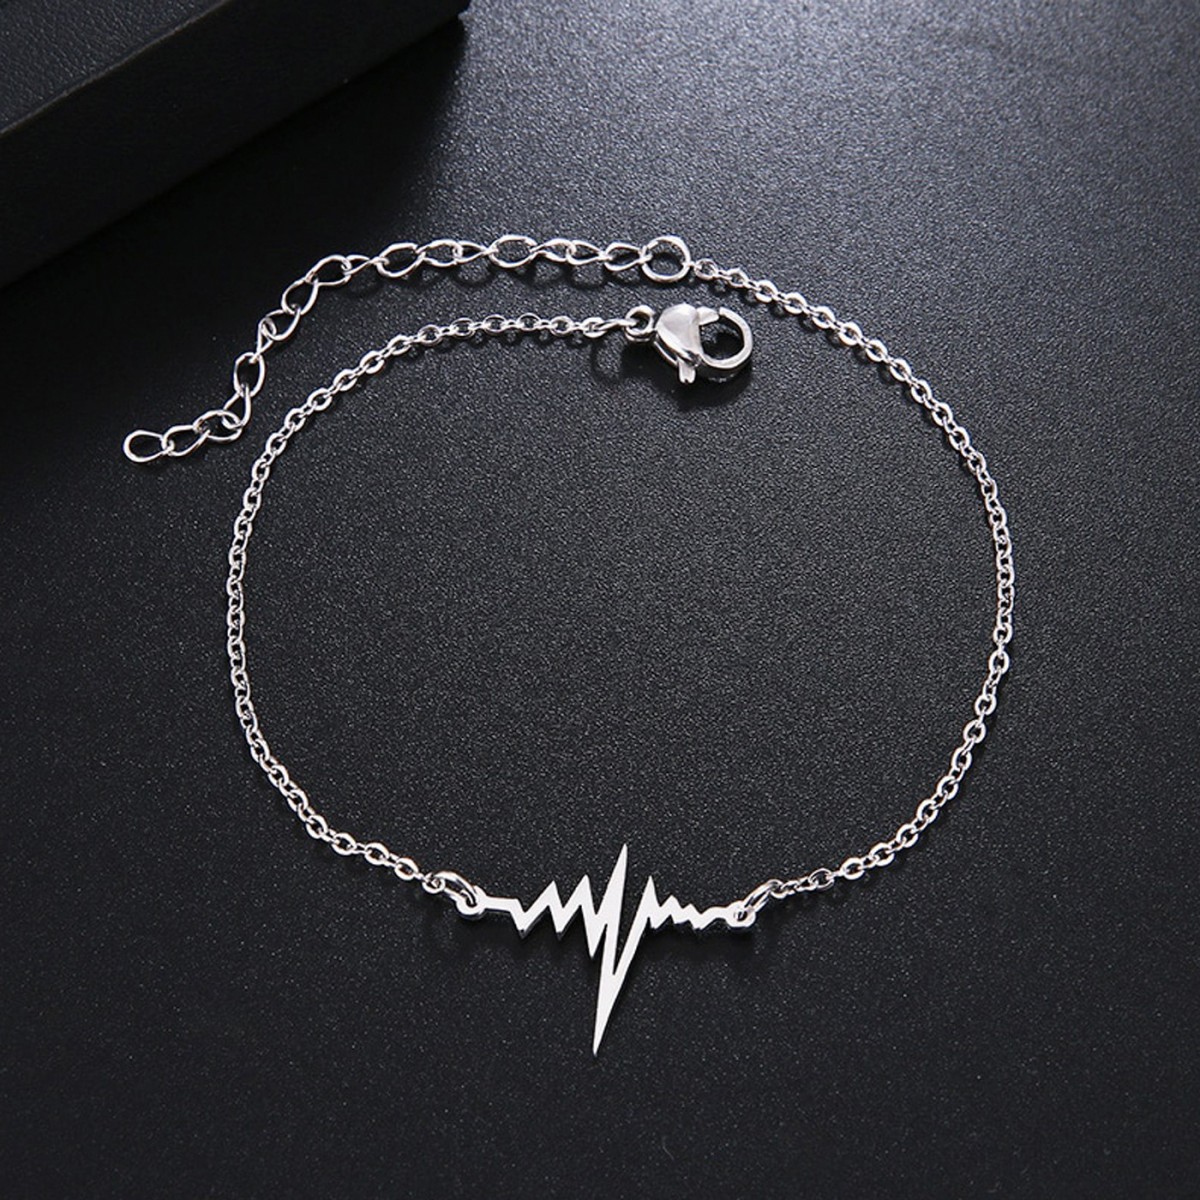 Buy GIVA 925 Sterling Silver Heartbeat Drop Bracelet, Adjustable Valentines  Gift for Girlfriend, Gifts for Women & Girls| With Certificate of  Authenticity and 925 Stamp | 6 Month Warranty* at Amazon.in